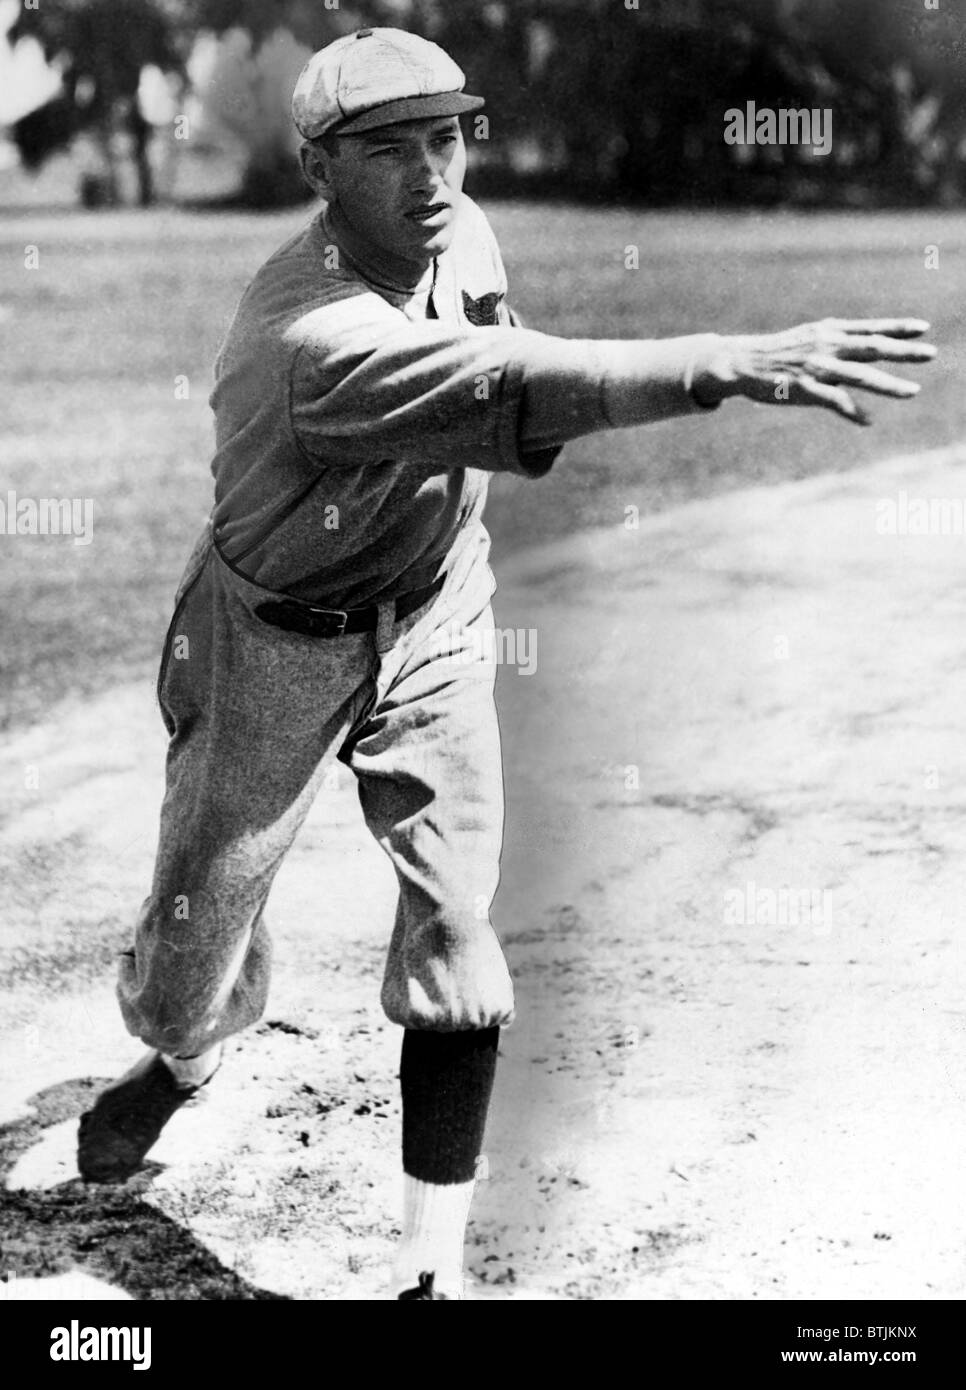 Jay Hanna 'Dizzy' Dean, (1910-1974) ace pitcher for St. Louis Cardinals during 1930s, 9/29/34 Stock Photo